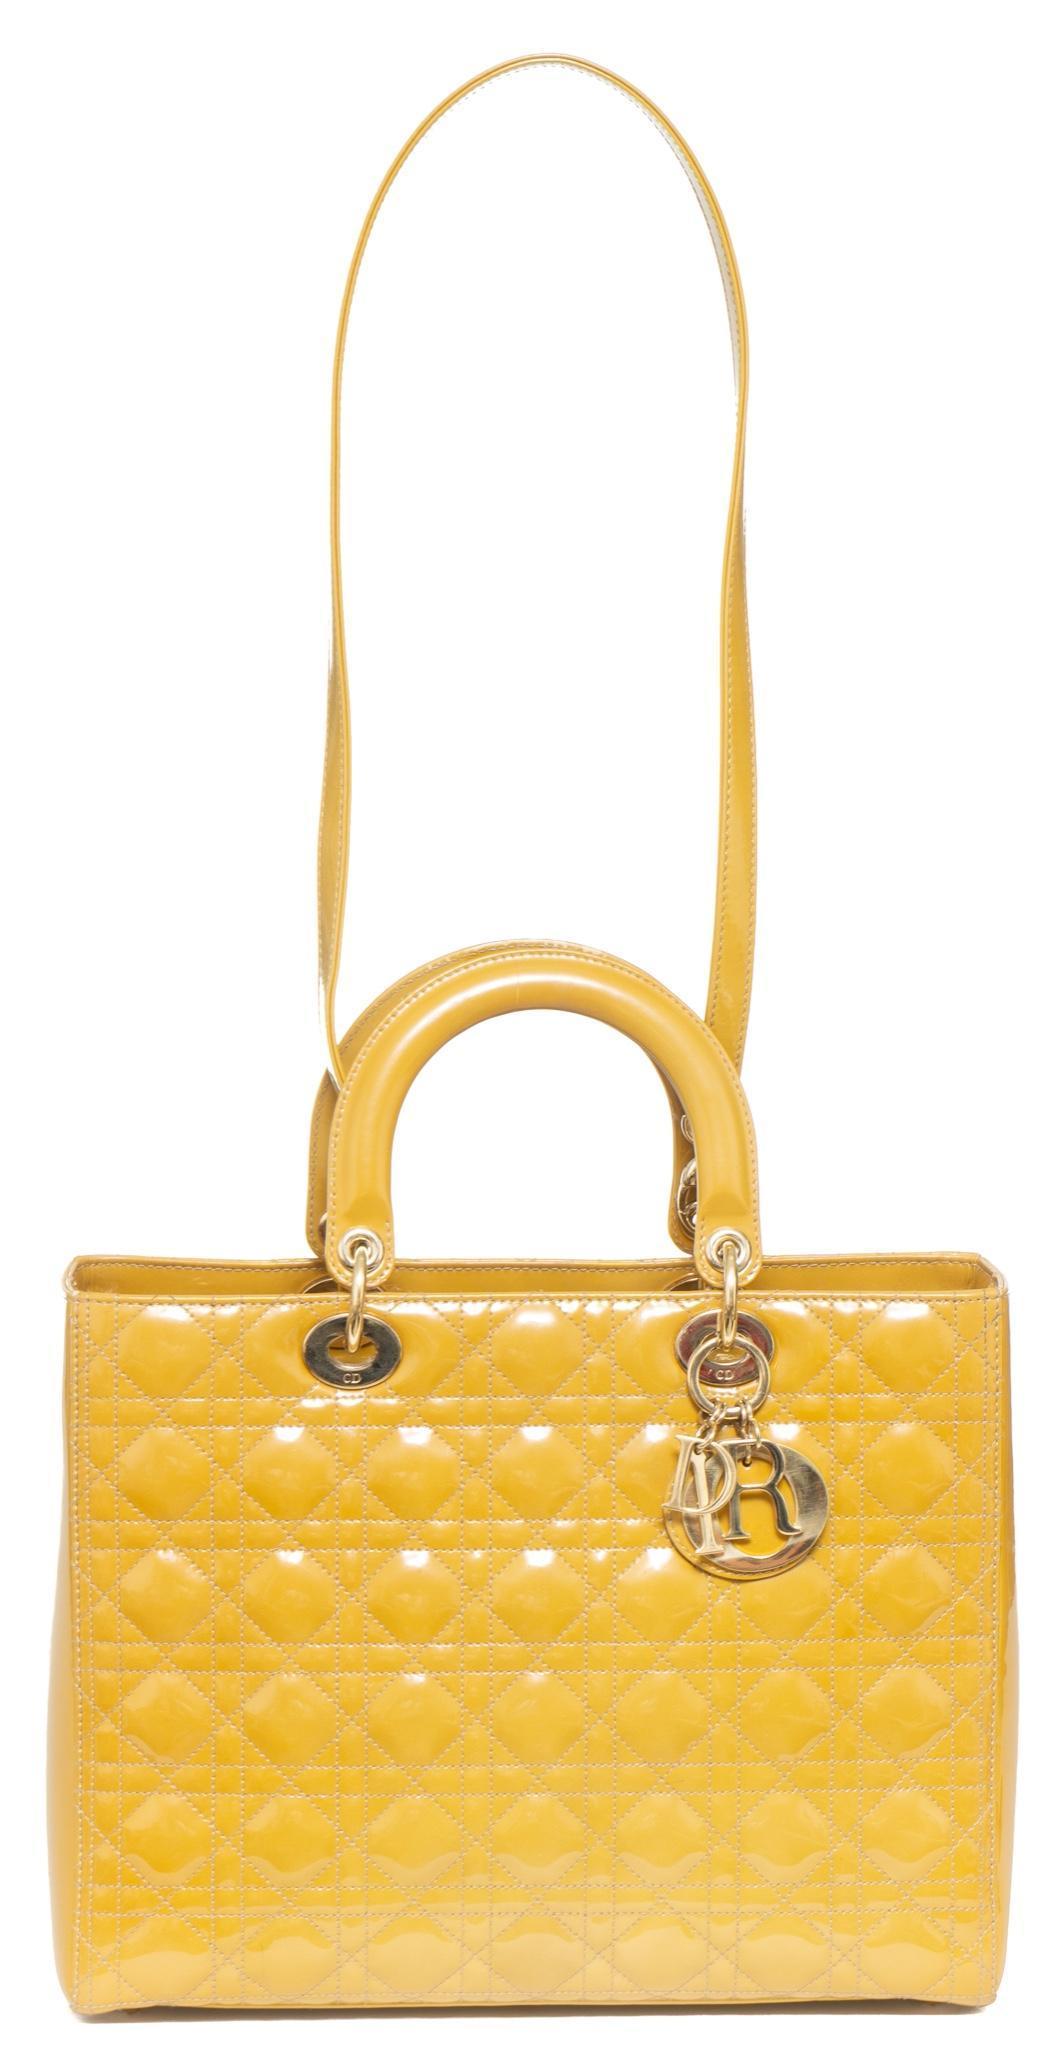 Sold at Auction: Louis Vuitton Patent Leather Crossbody Bag